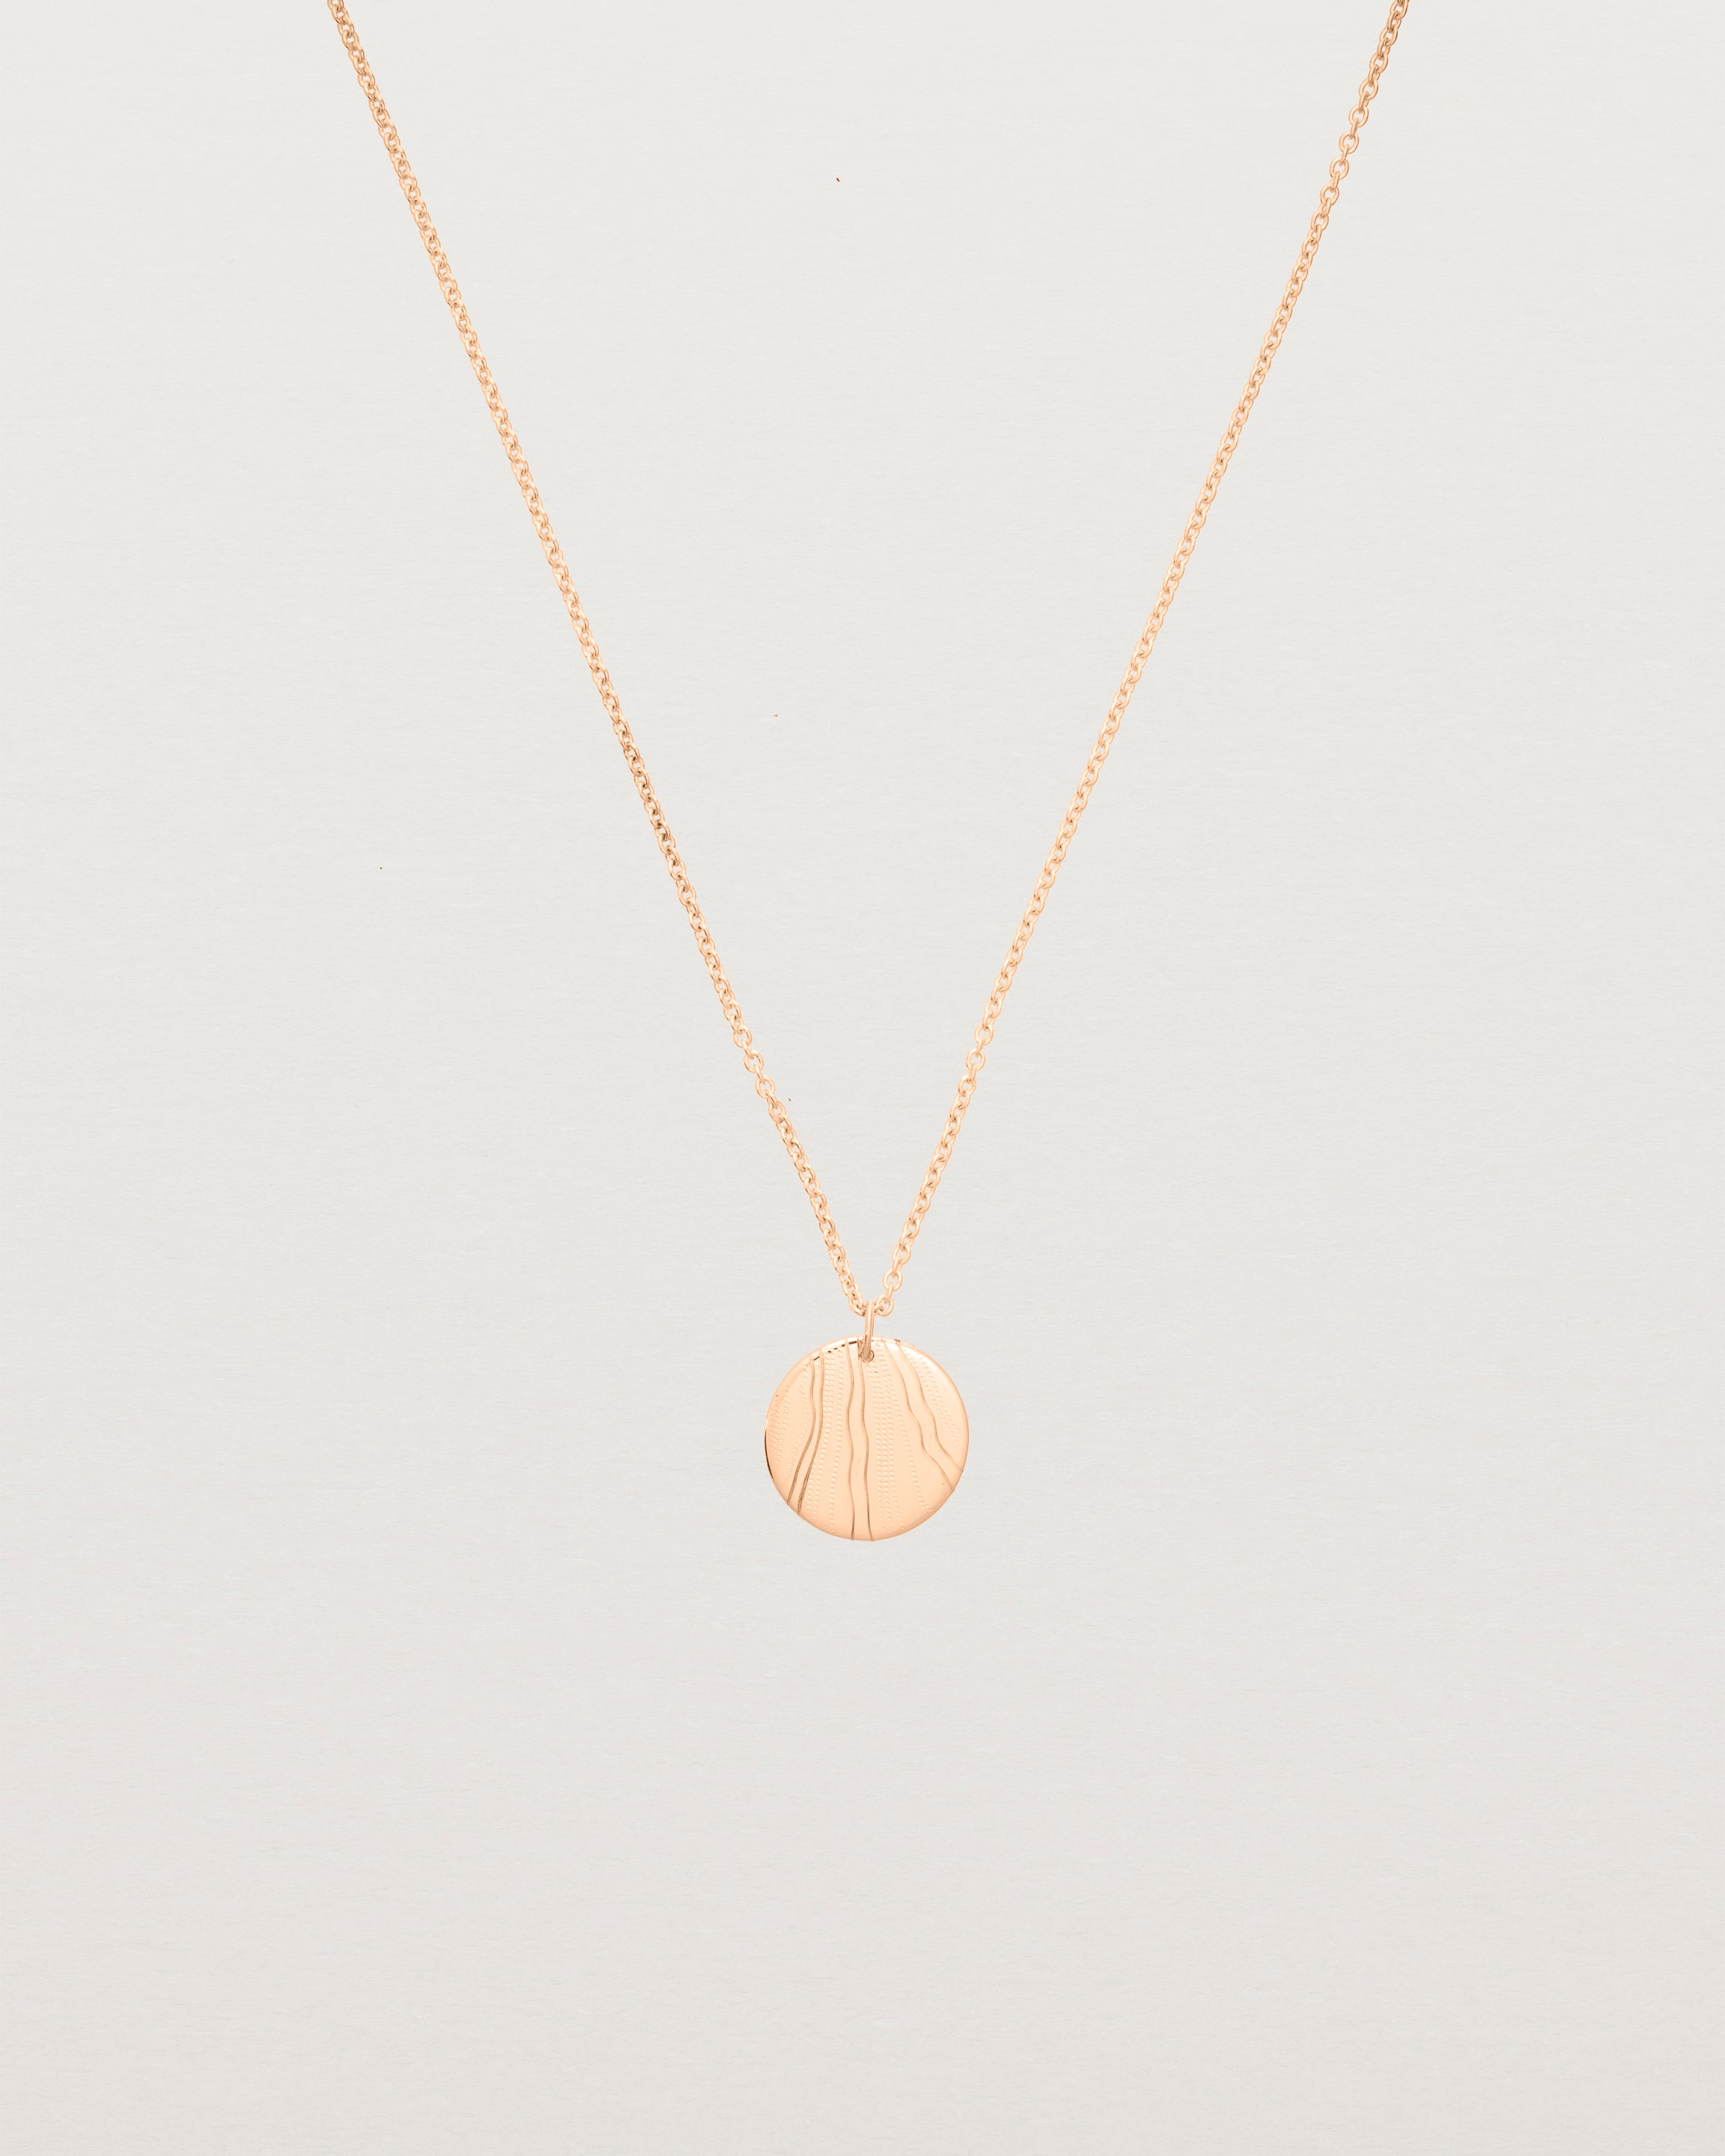 An engraved rose gold pendant